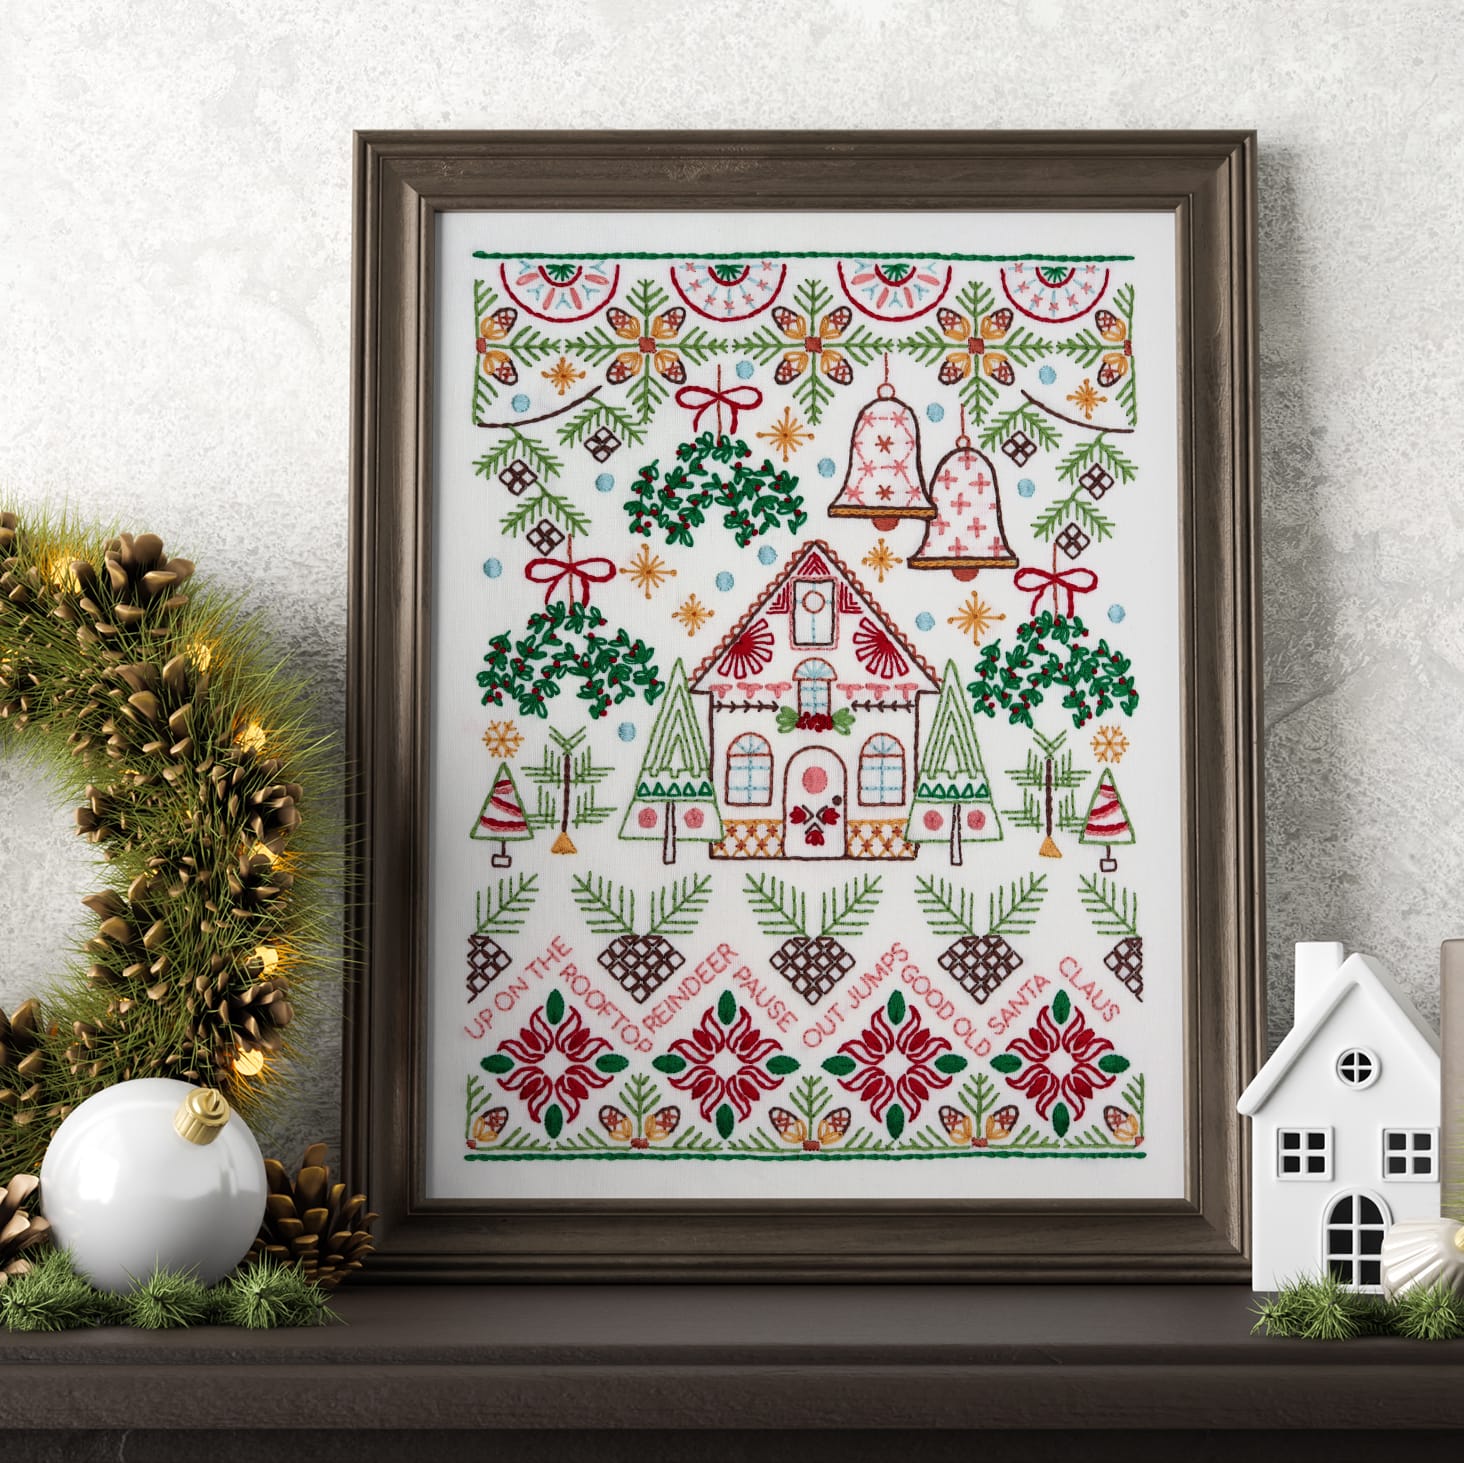 framed Christmas Pines embroidery displayed on mantle with holiday decor